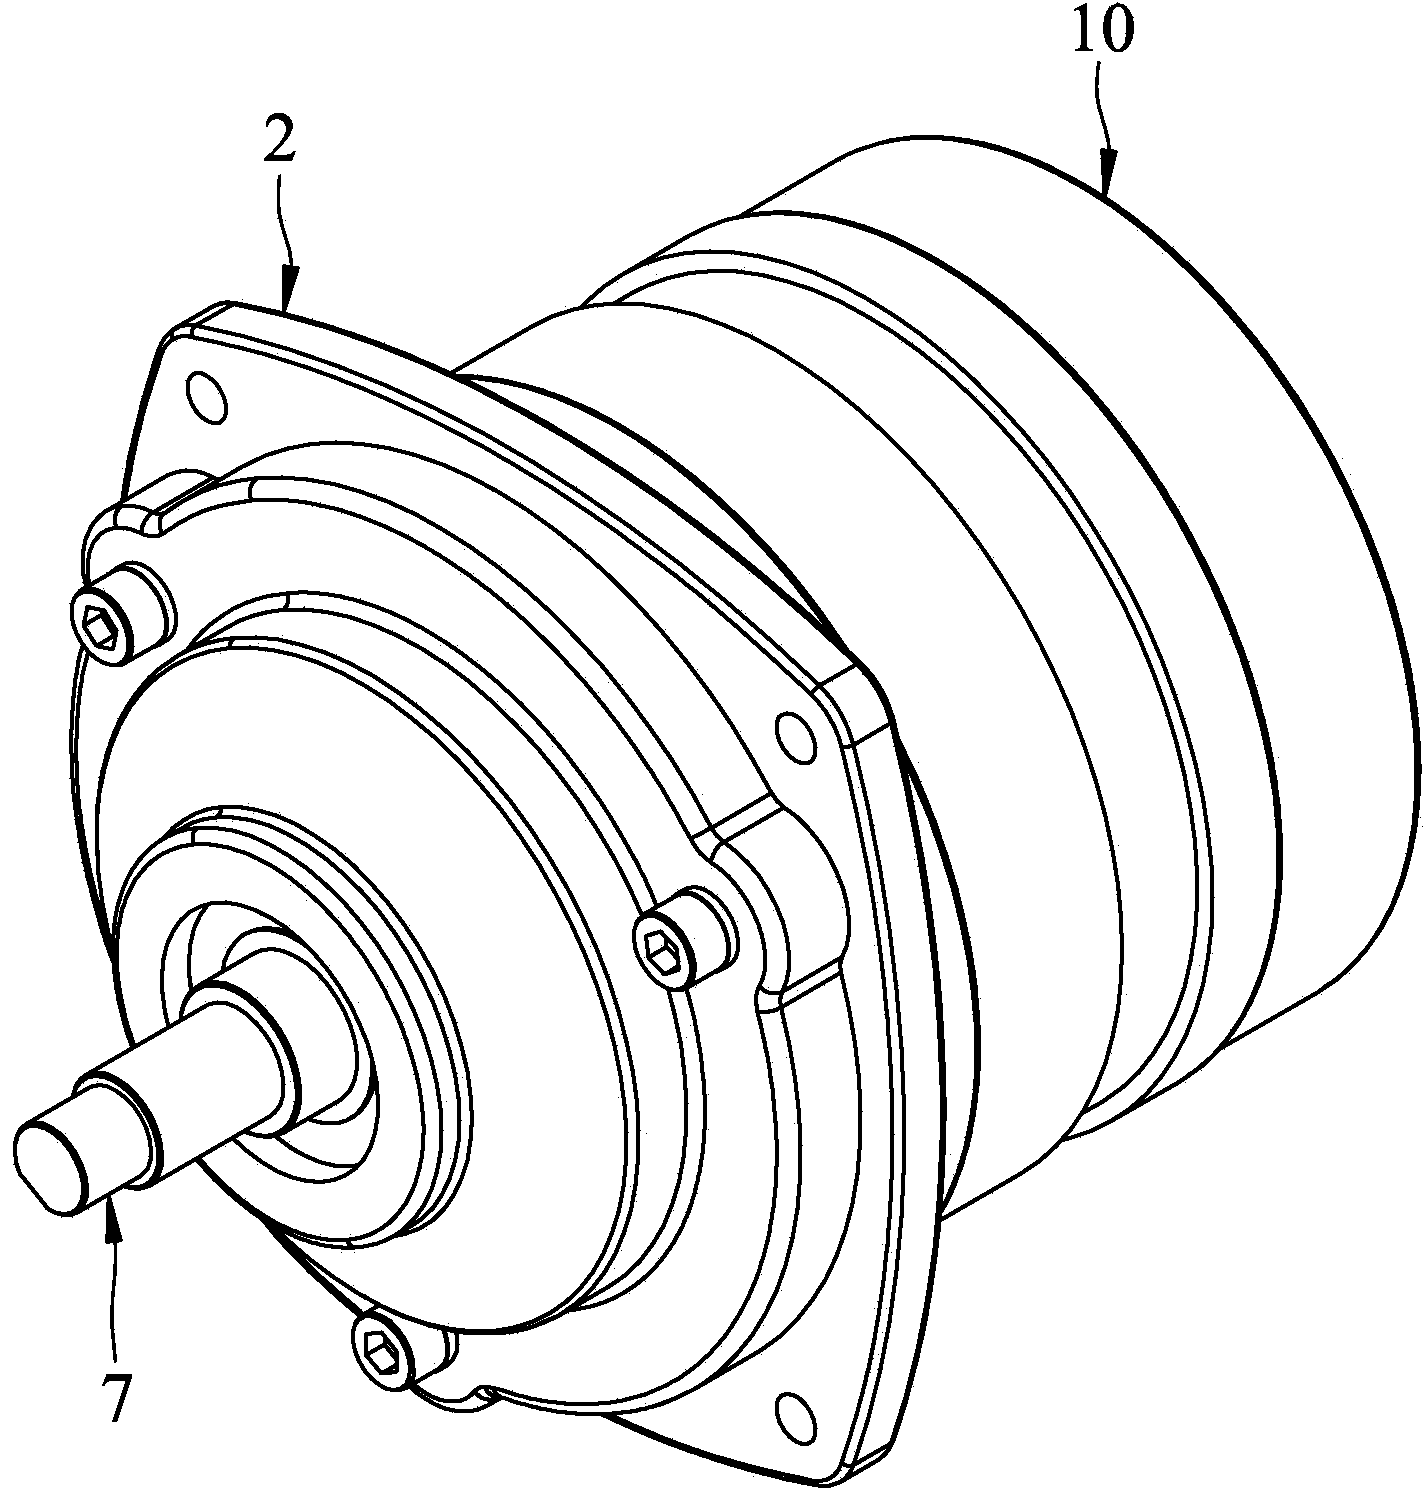 Few-tooth-difference speed reducer capable of reducing noise and wear